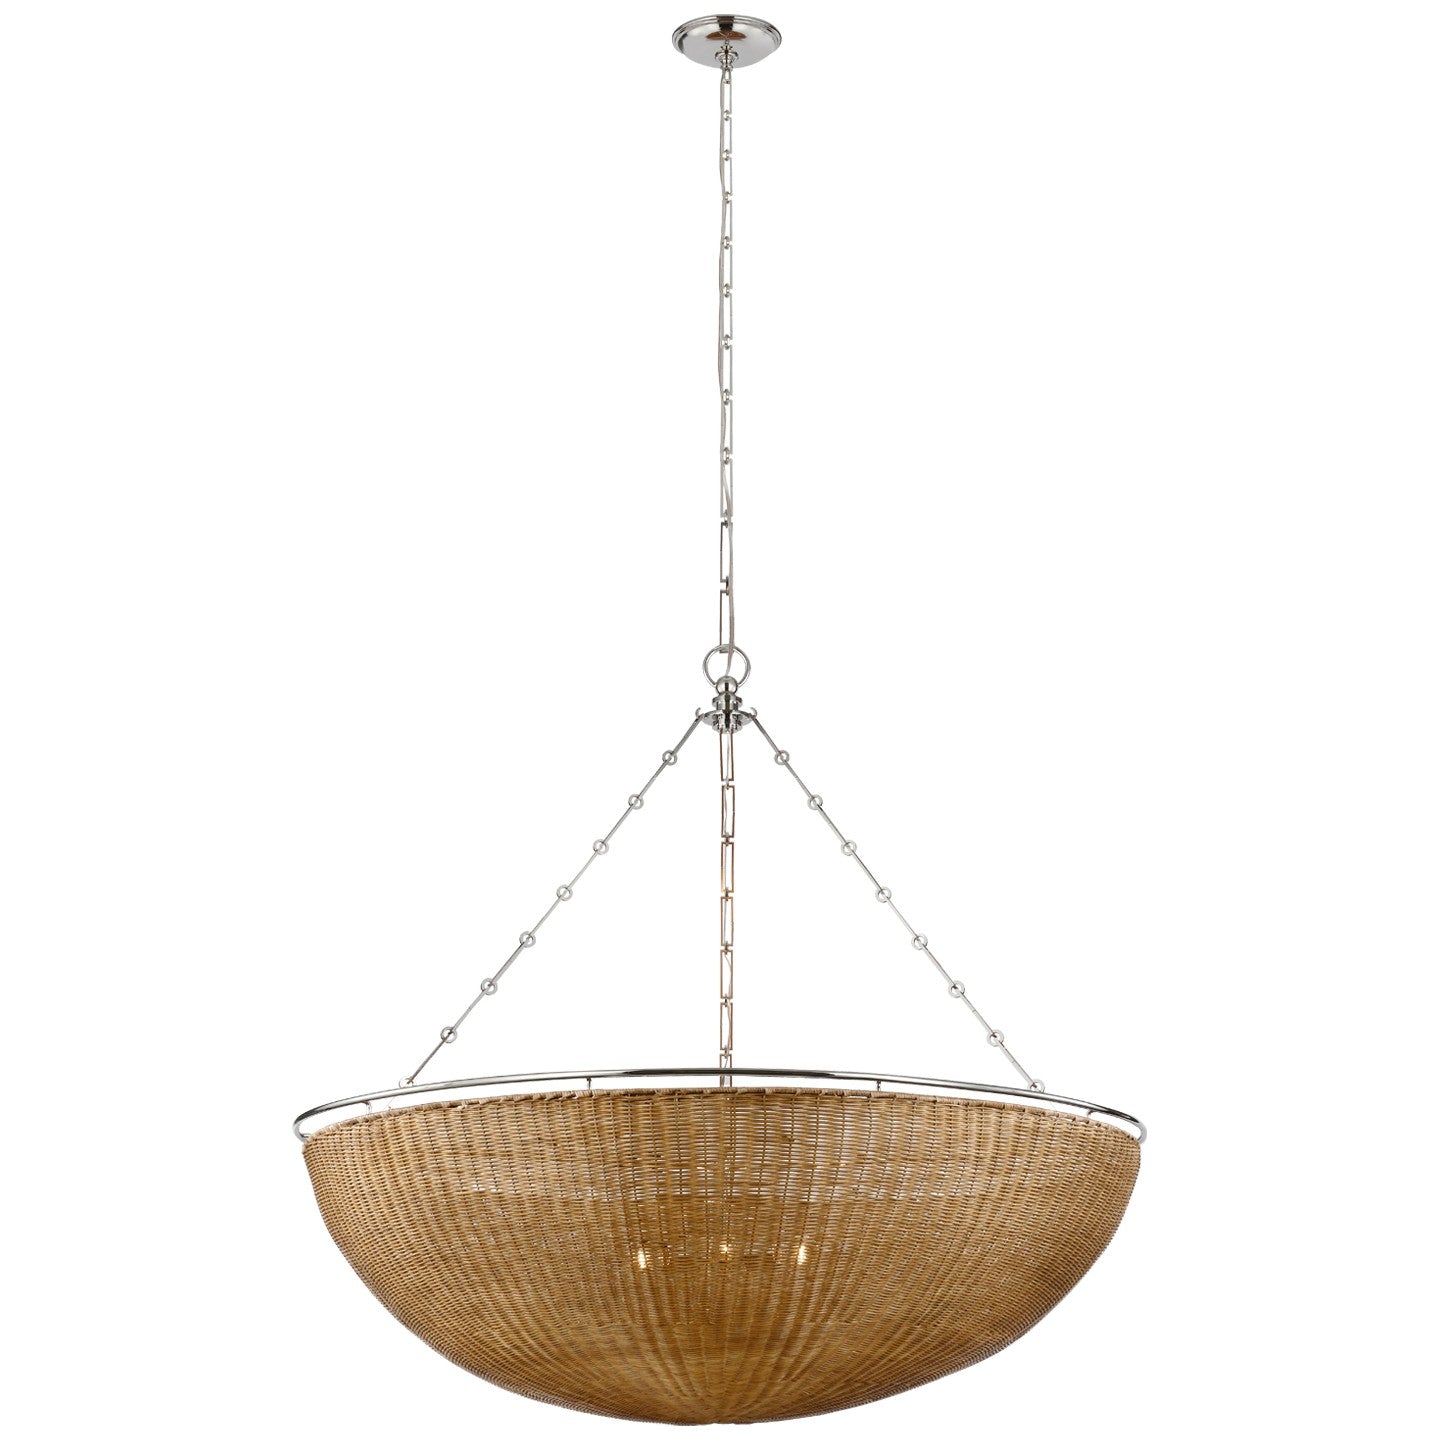 Visual Comfort Signature - CHC 5639PN/NTW - LED Chandelier - Clovis - Polished Nickel and Natural Wicker